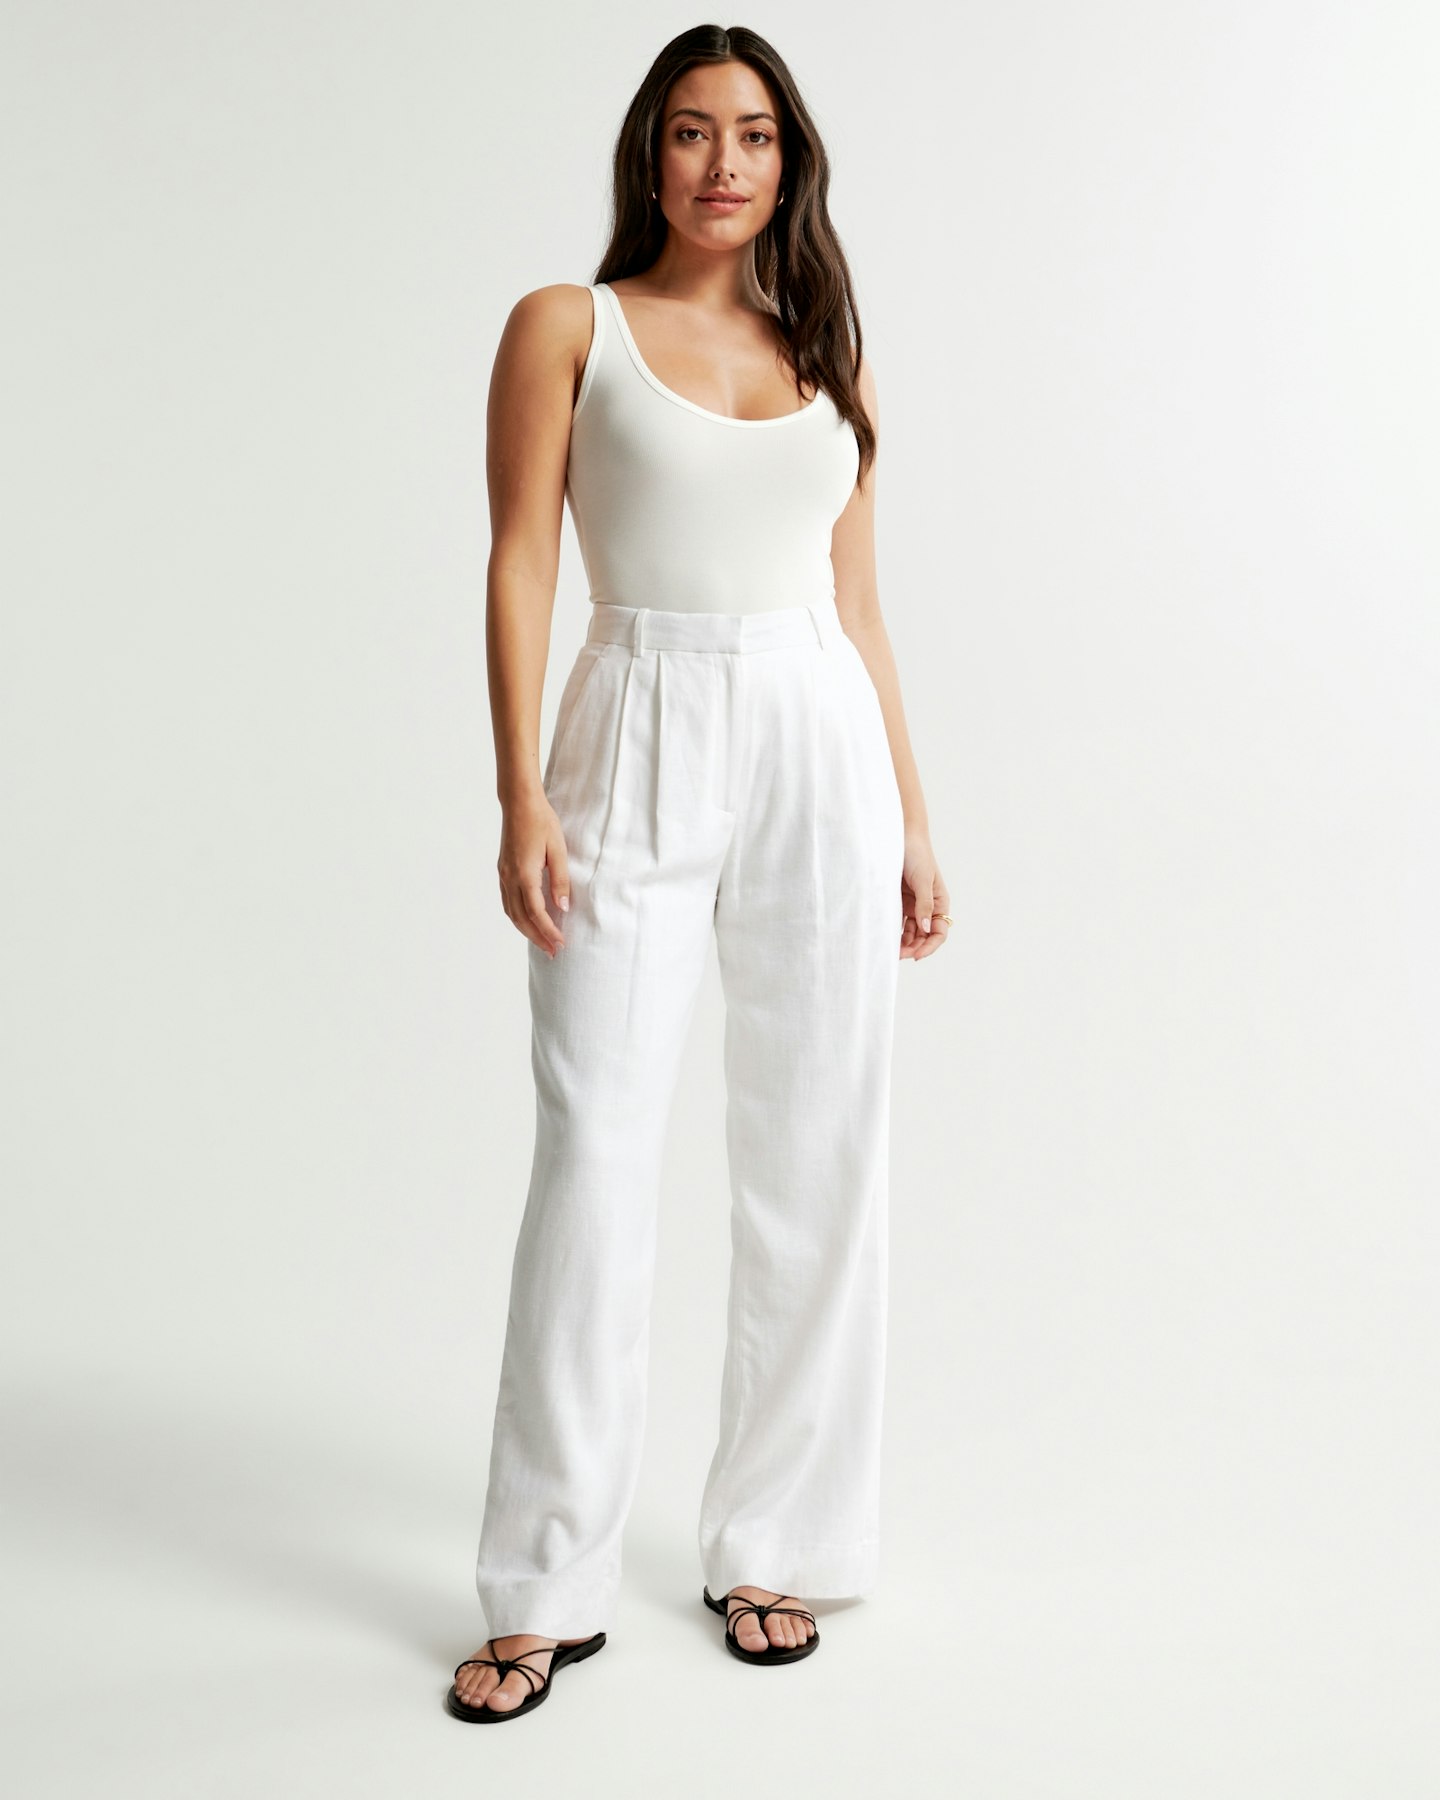 Abercrombie & Fitch, Tailored Linen-Blend Pant